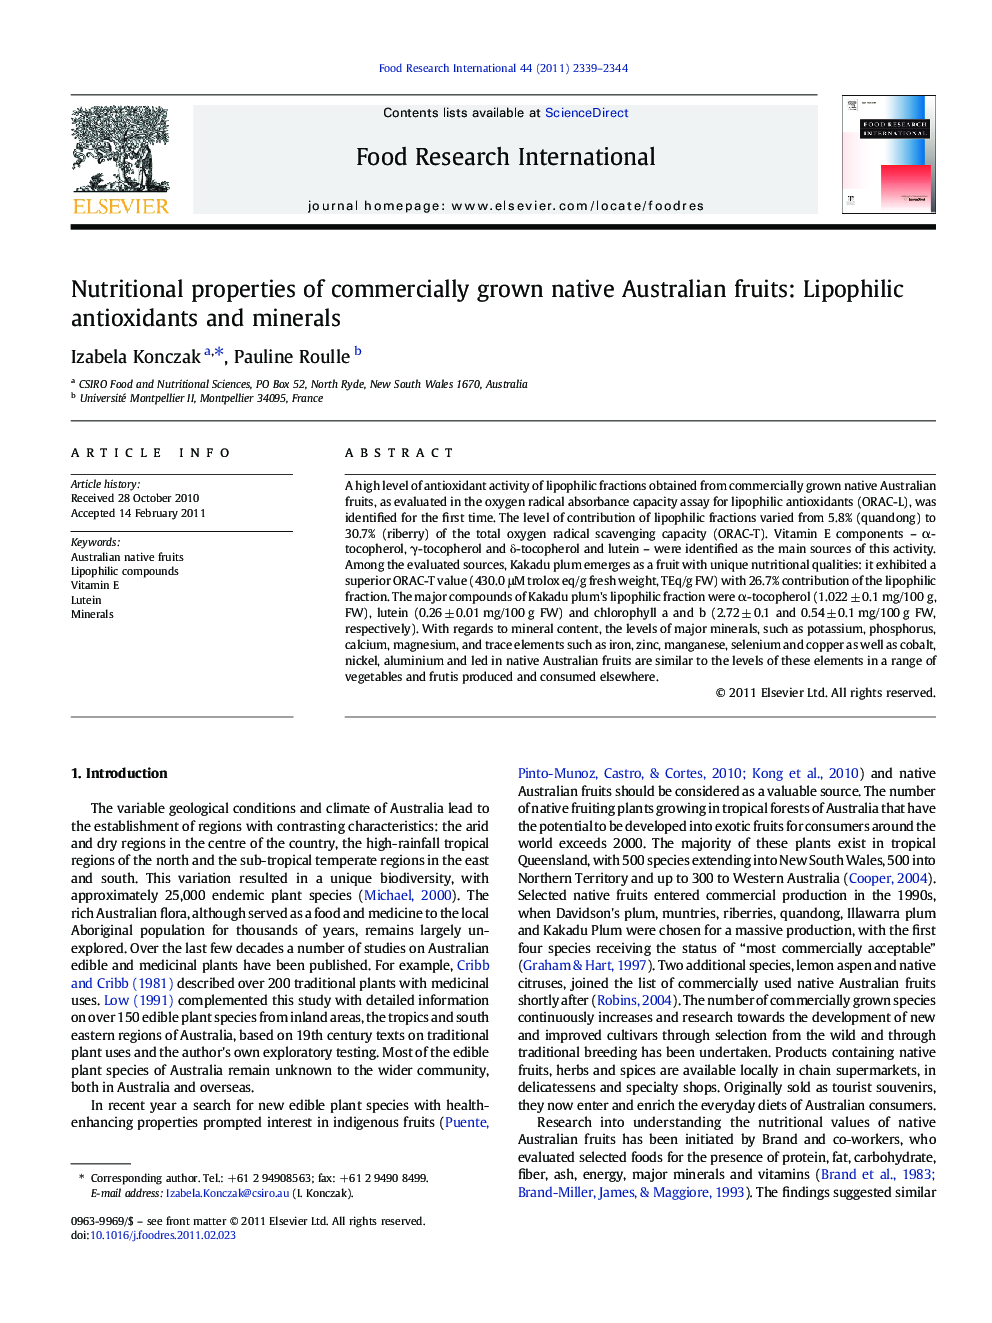 Nutritional properties of commercially grown native Australian fruits: Lipophilic antioxidants and minerals